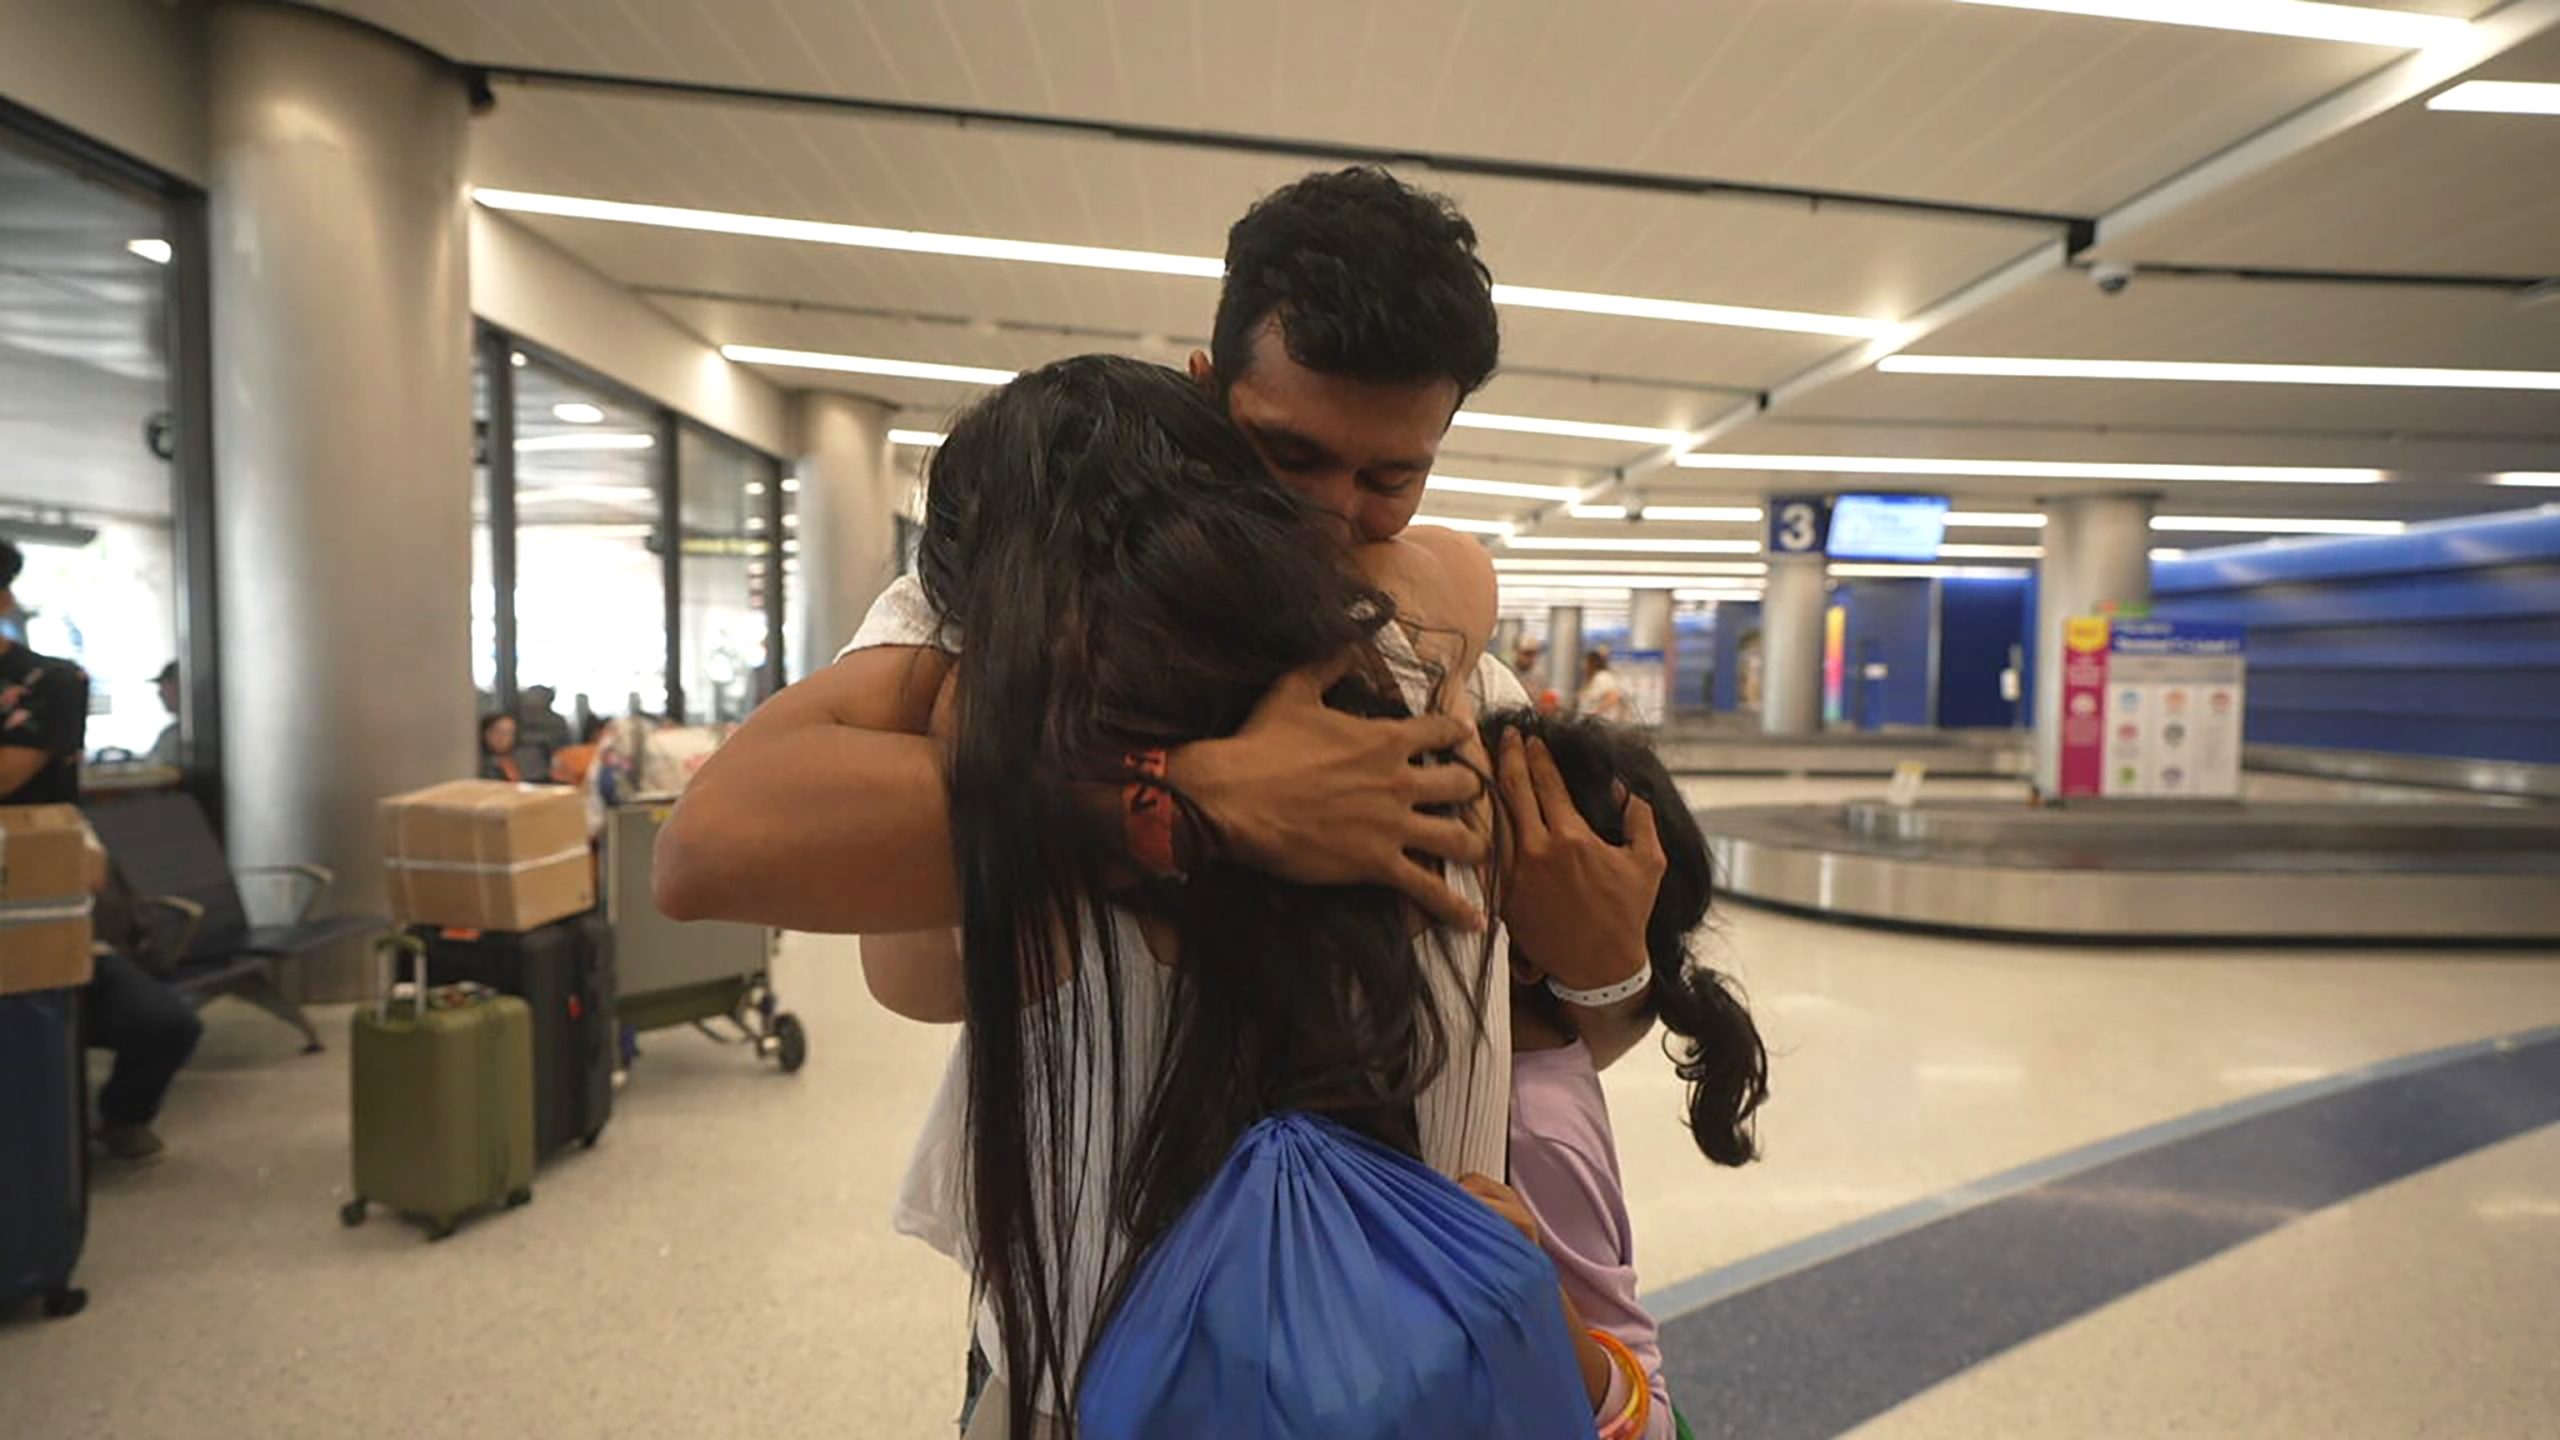 Colombian Migrant Father Successfully Reunites with Family Following Separation and Detention at Texas-Mexico Border